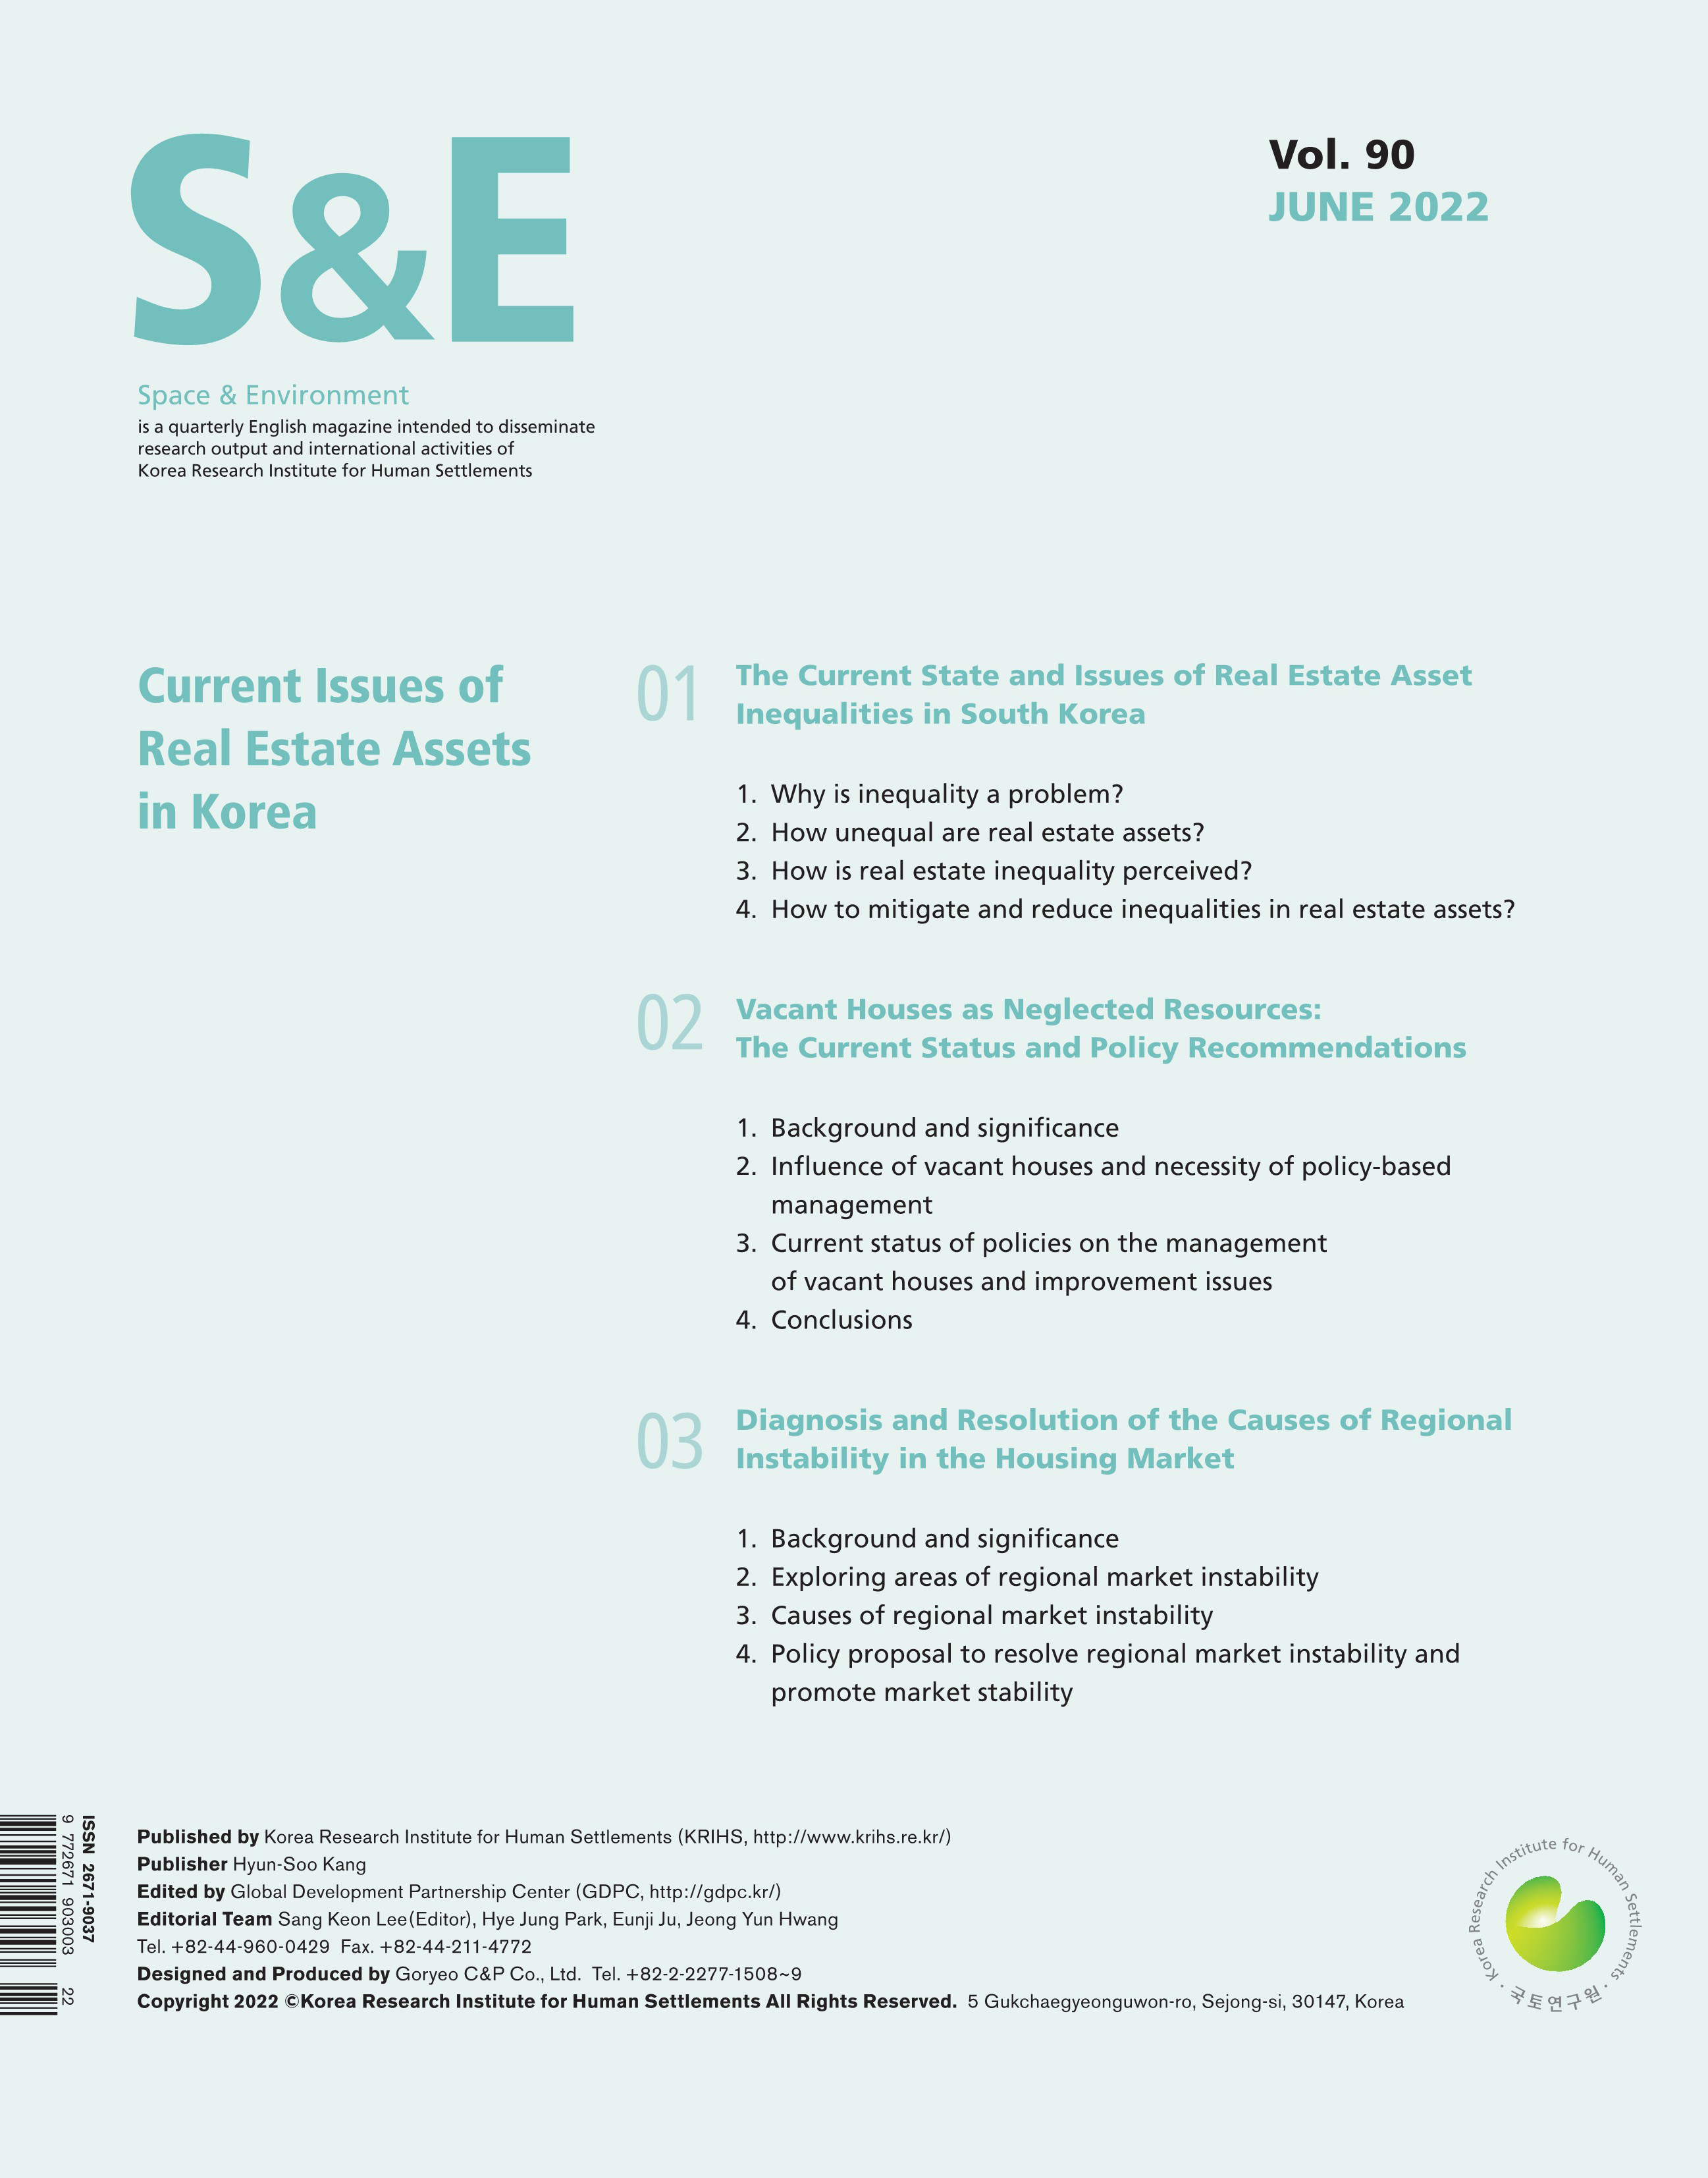 SPACE & ENVIRONMENT VOL. 90 (JUNE 2022)
Current Issues of Real Estate Assets in Korea